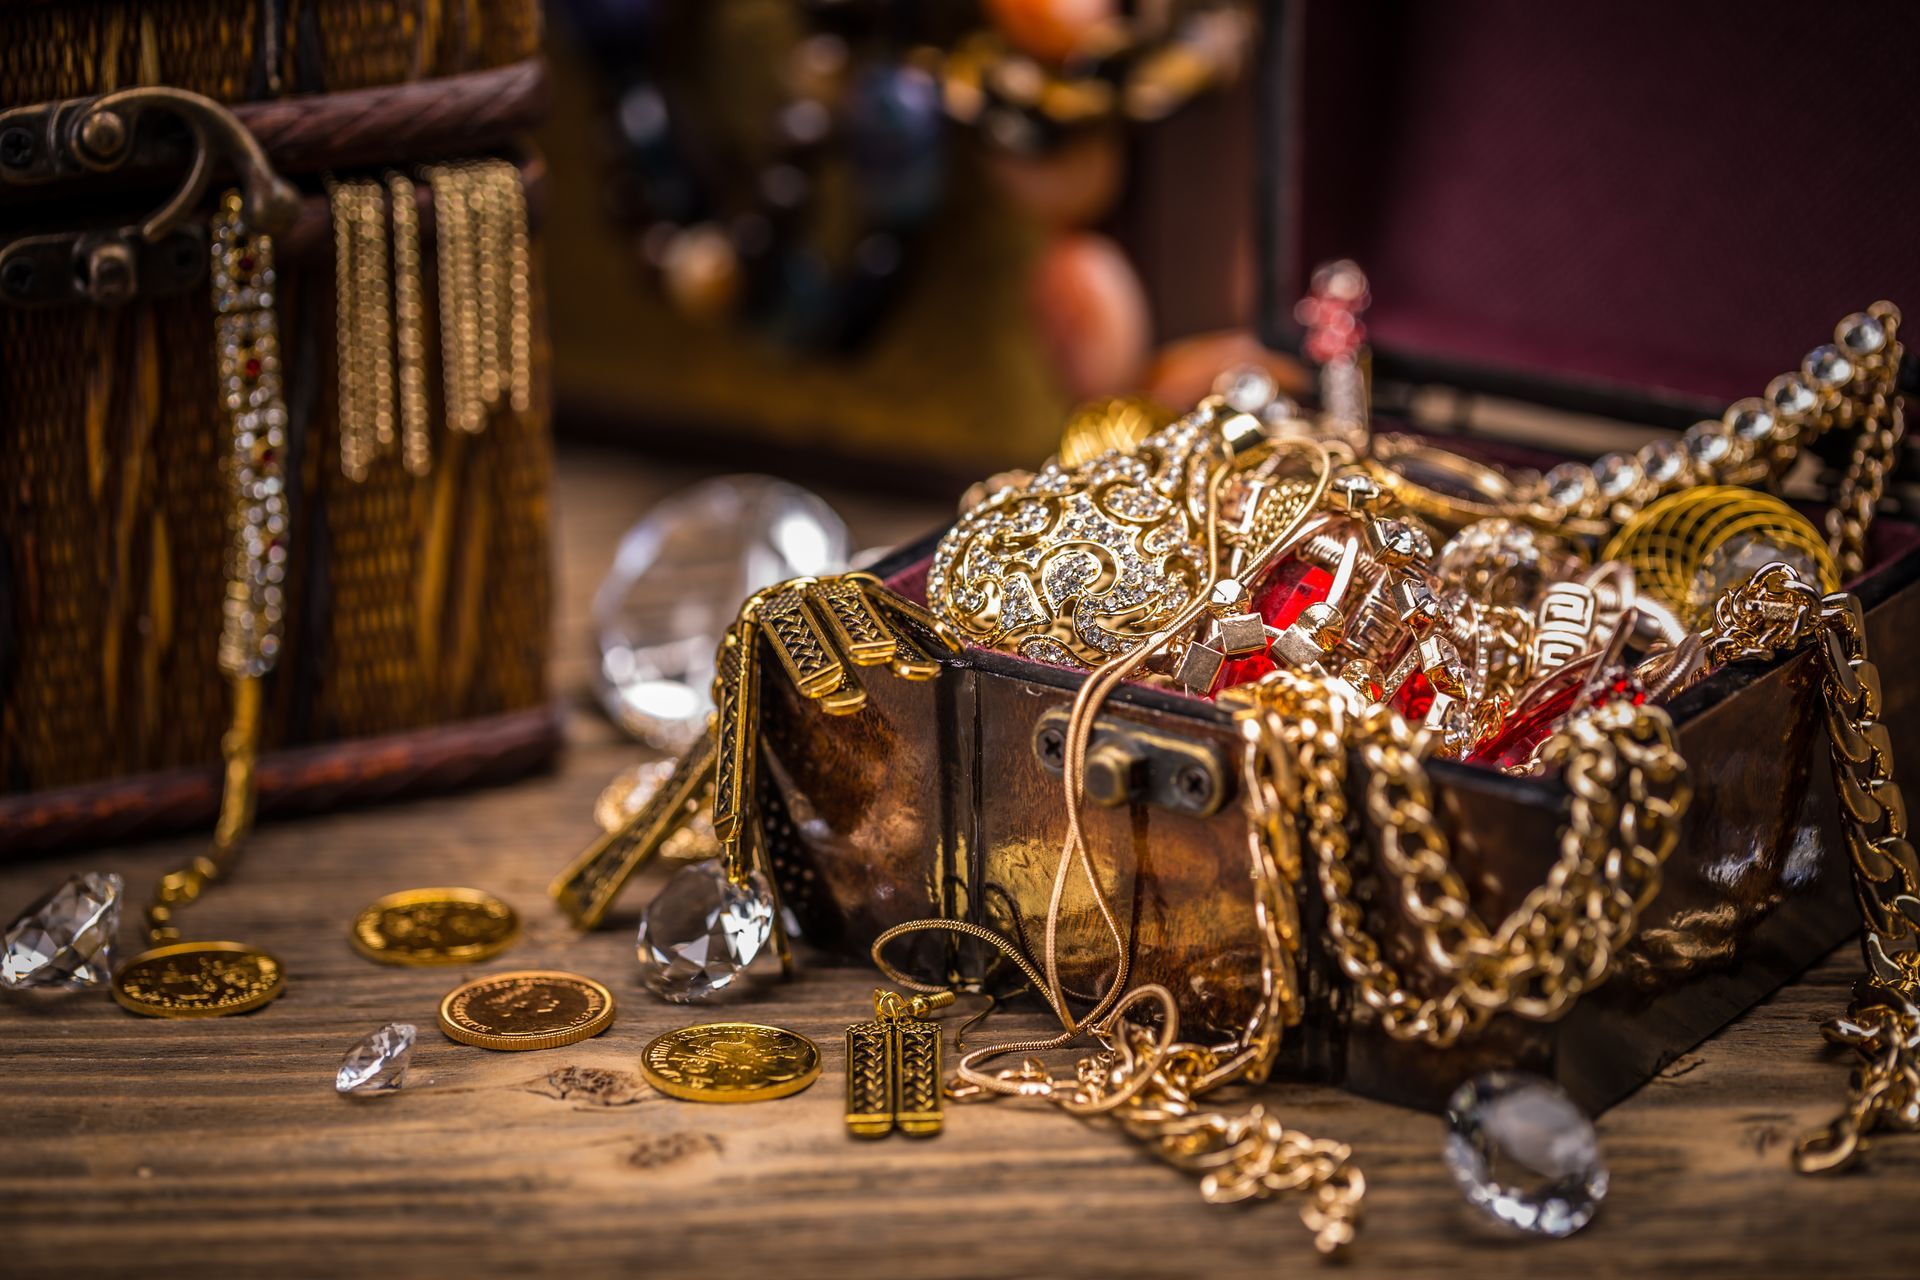 A treasure chest filled with gold jewelry on a wooden table.